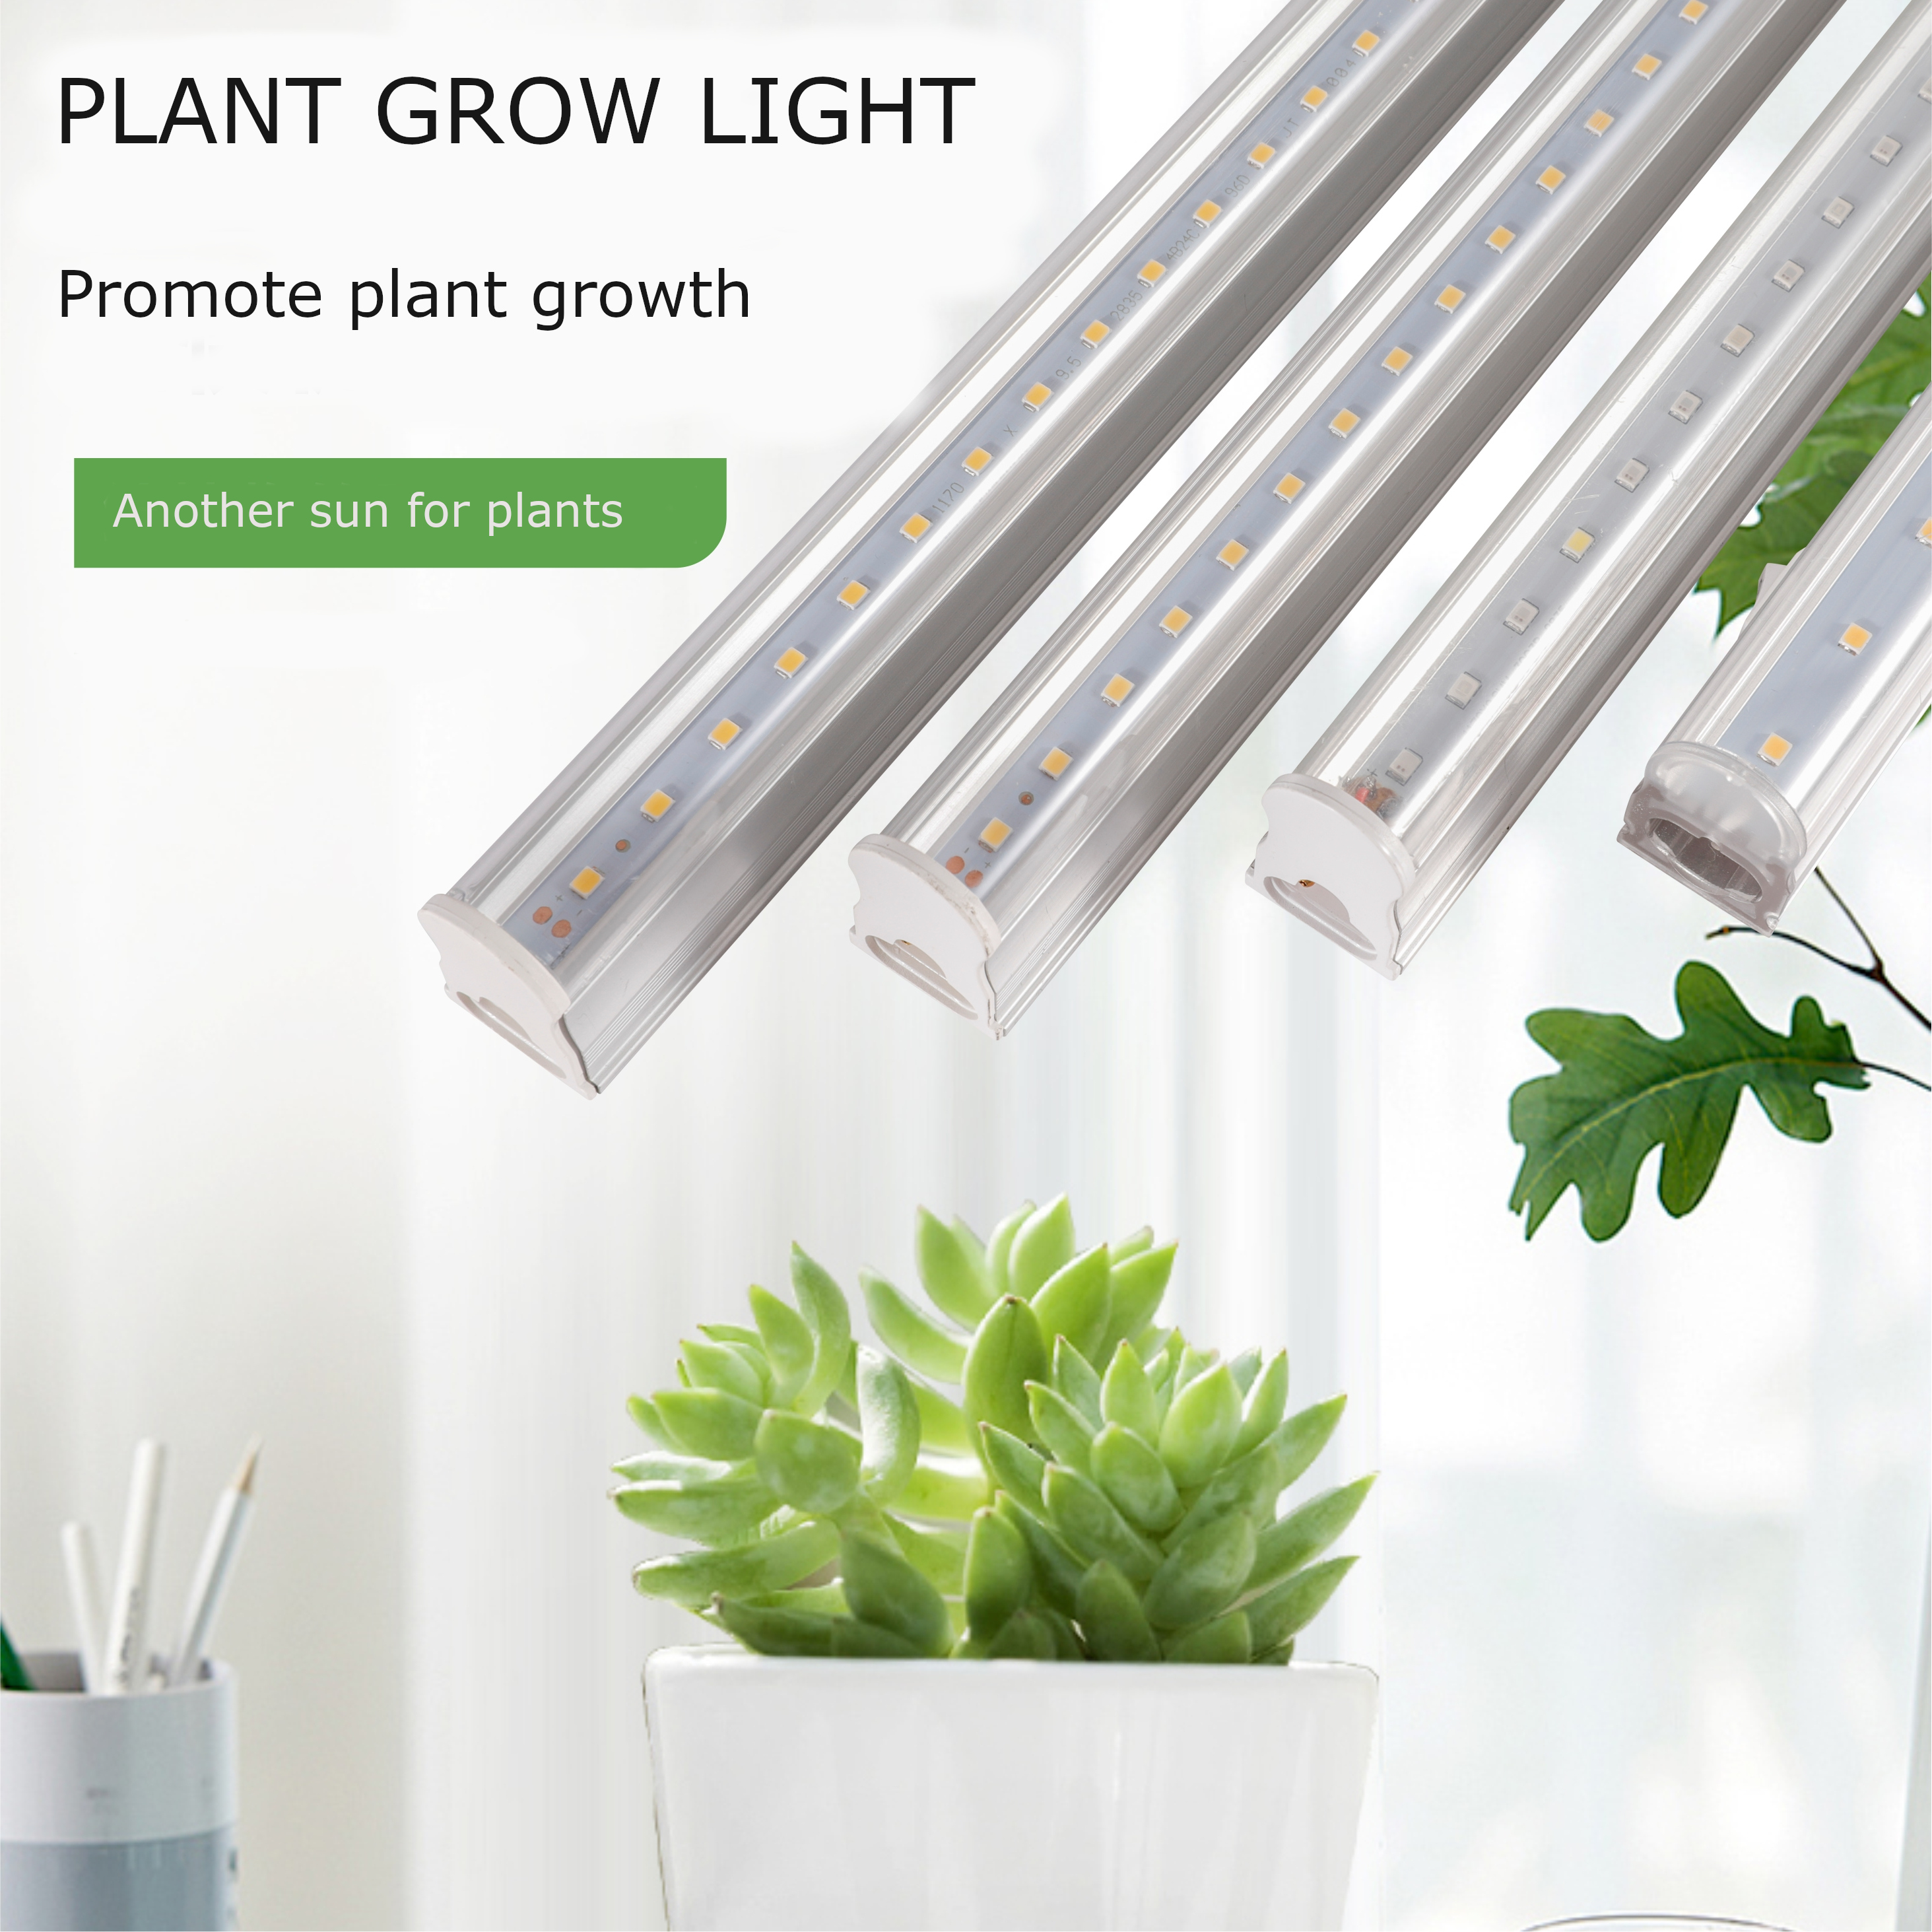 Led  plant grow tube light T5 1200mm with New Diodes & IR Lights Full Spectrum Veg Bloom Growing Lamps for Indoor Plants Seeding Flower Led Plant Light Fixture